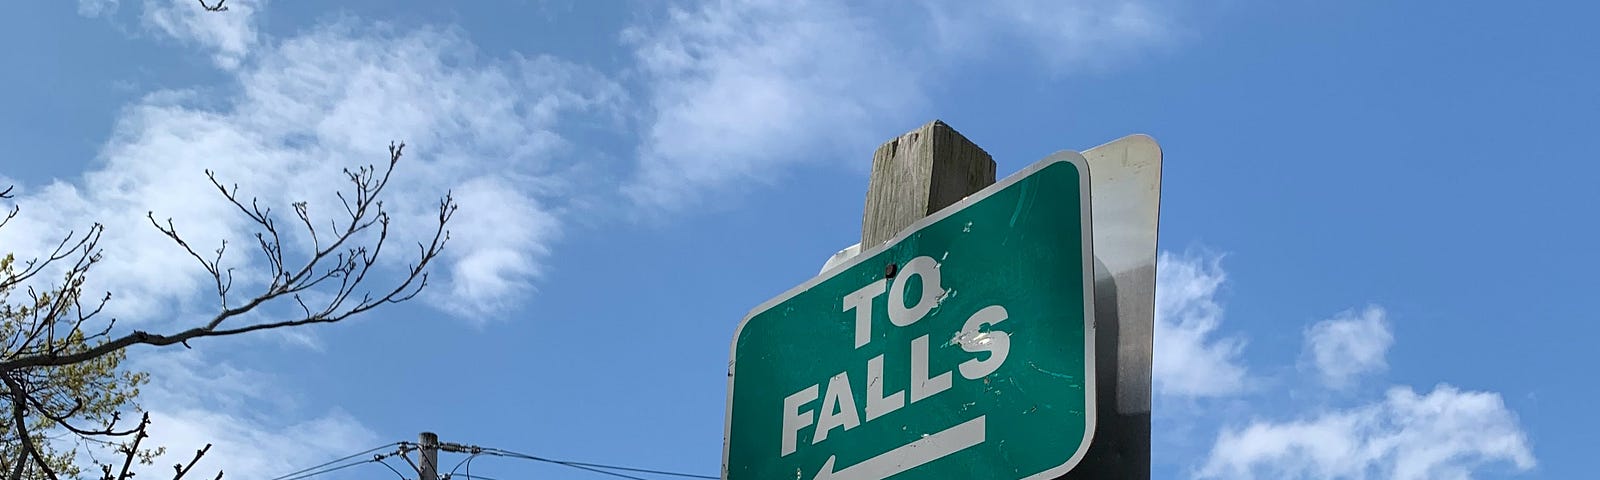 A sign in front of a blue sky reads “TO FALLS” with an arrow pointing left.